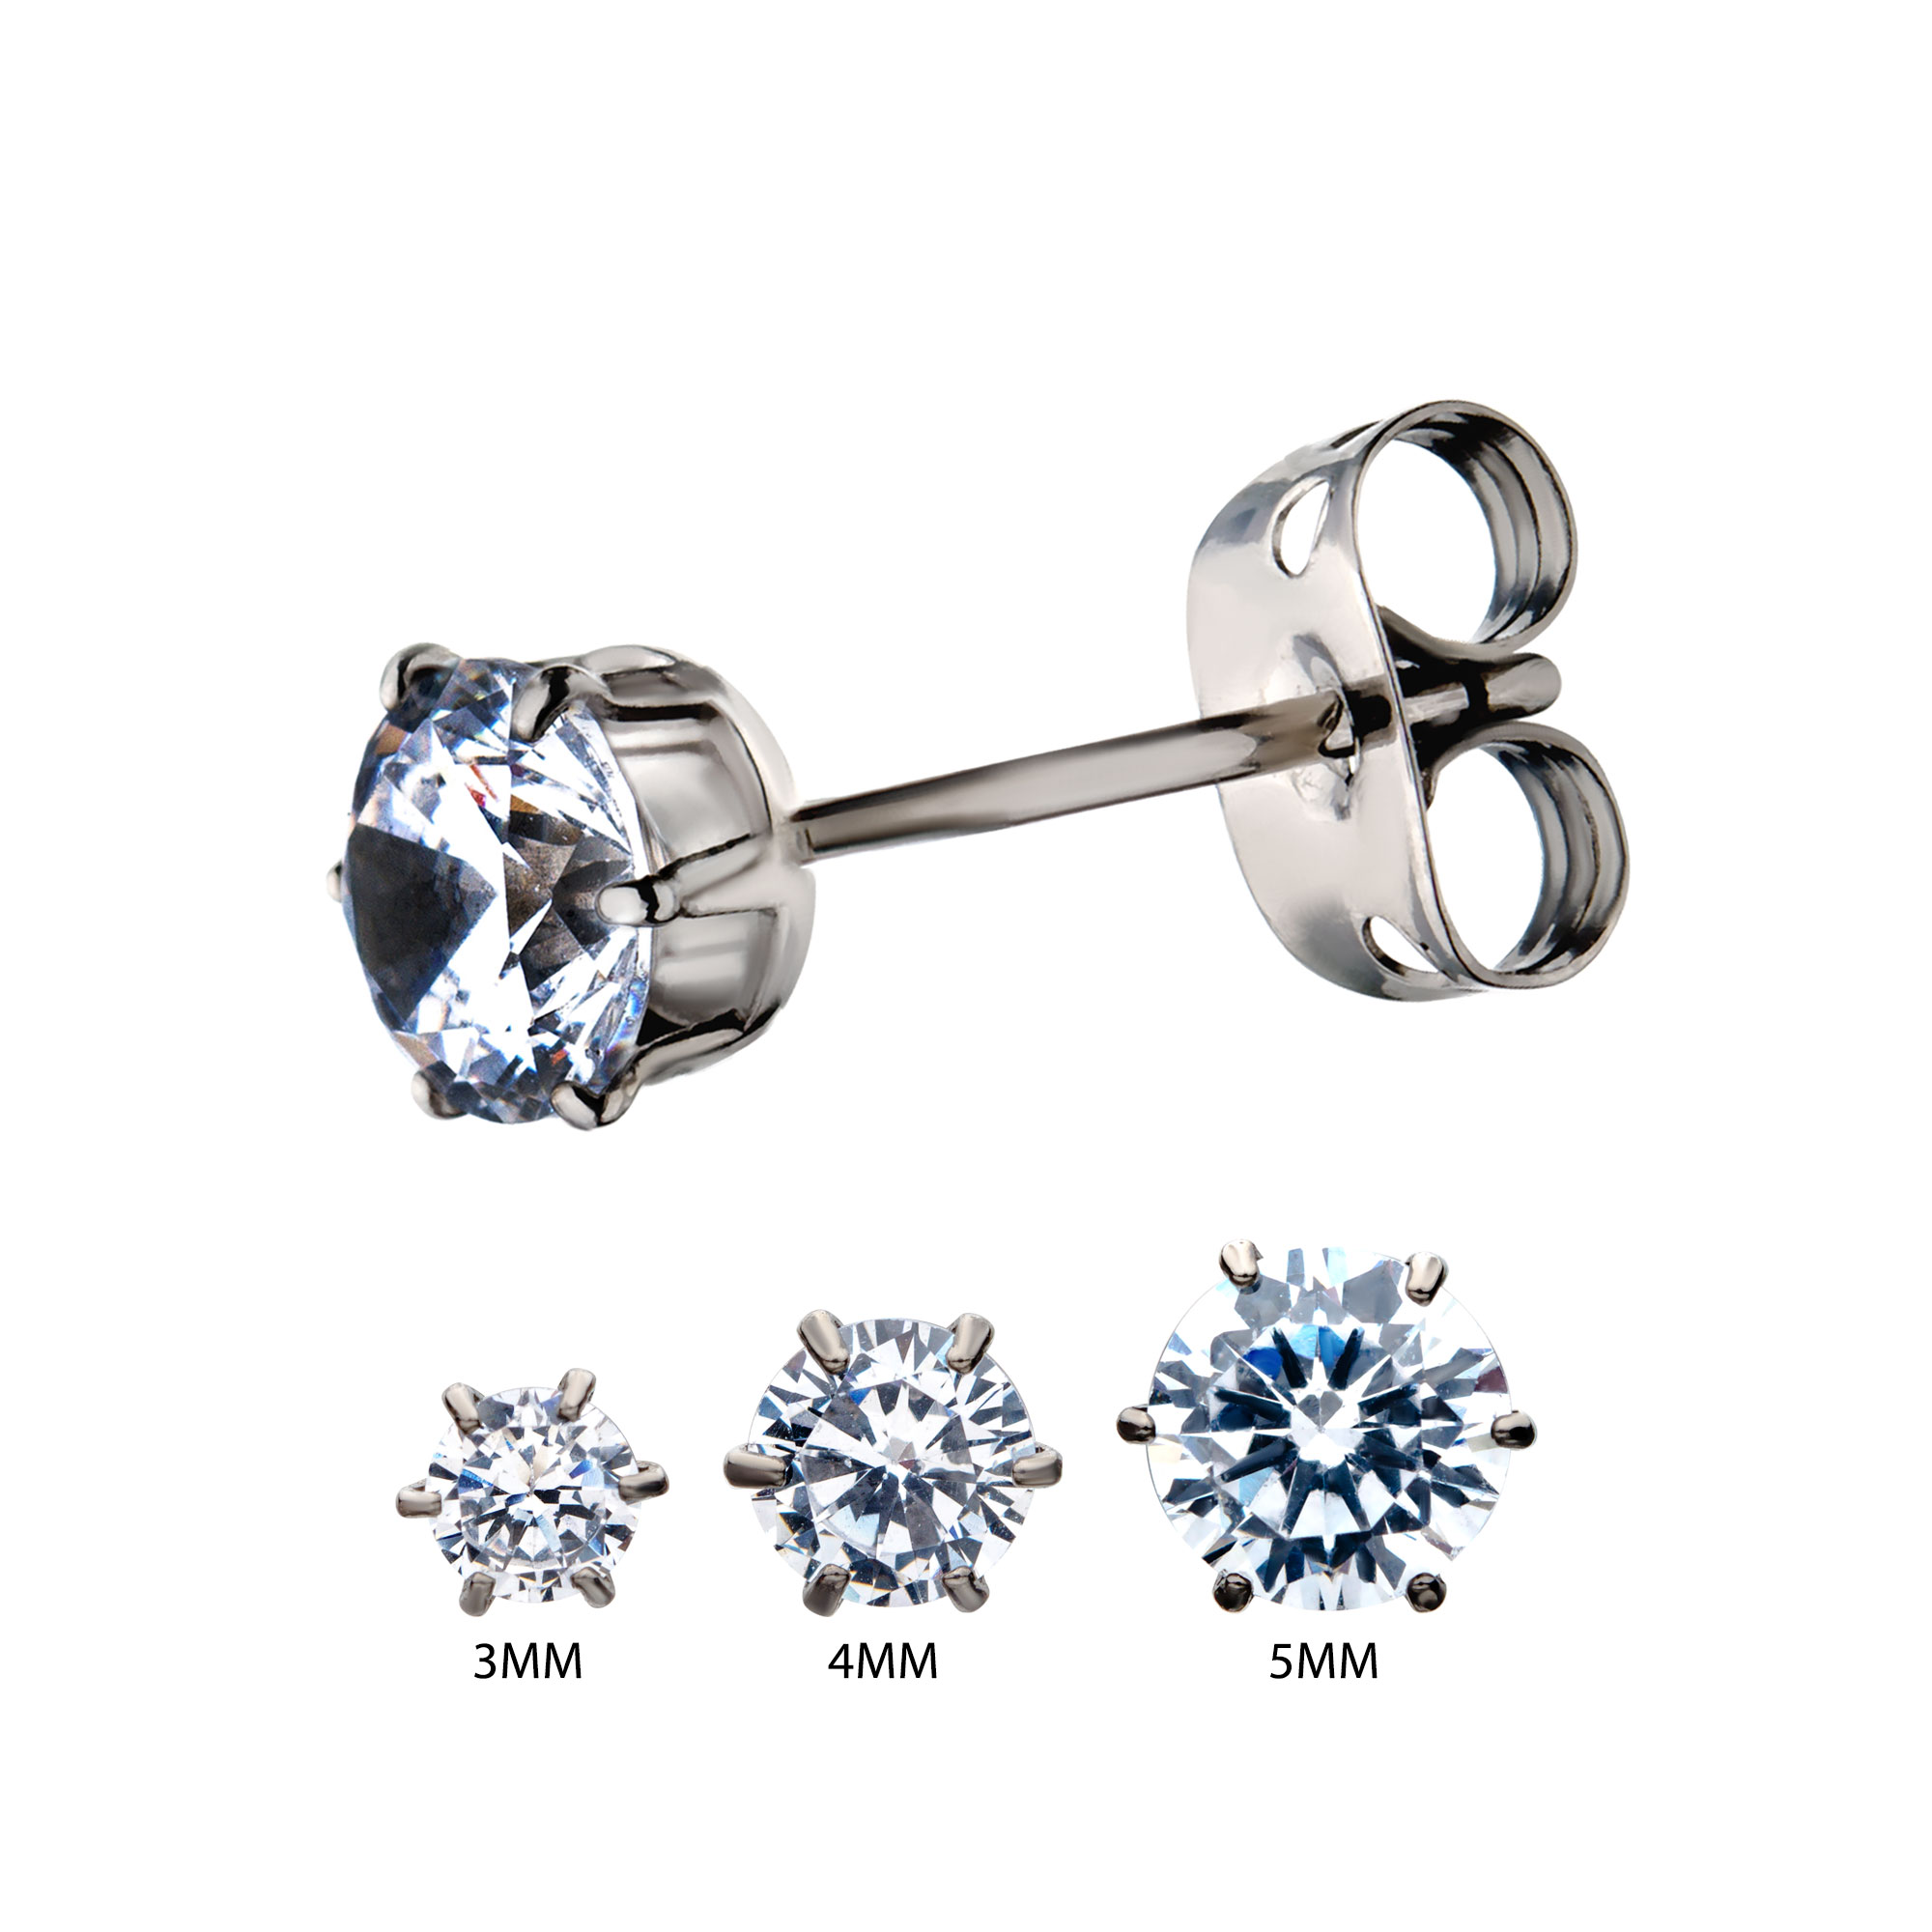 20g Titanium Post and Butterfly Back with Prong Set CZ Stud Earrings P.K. Bennett Jewelers Mundelein, IL